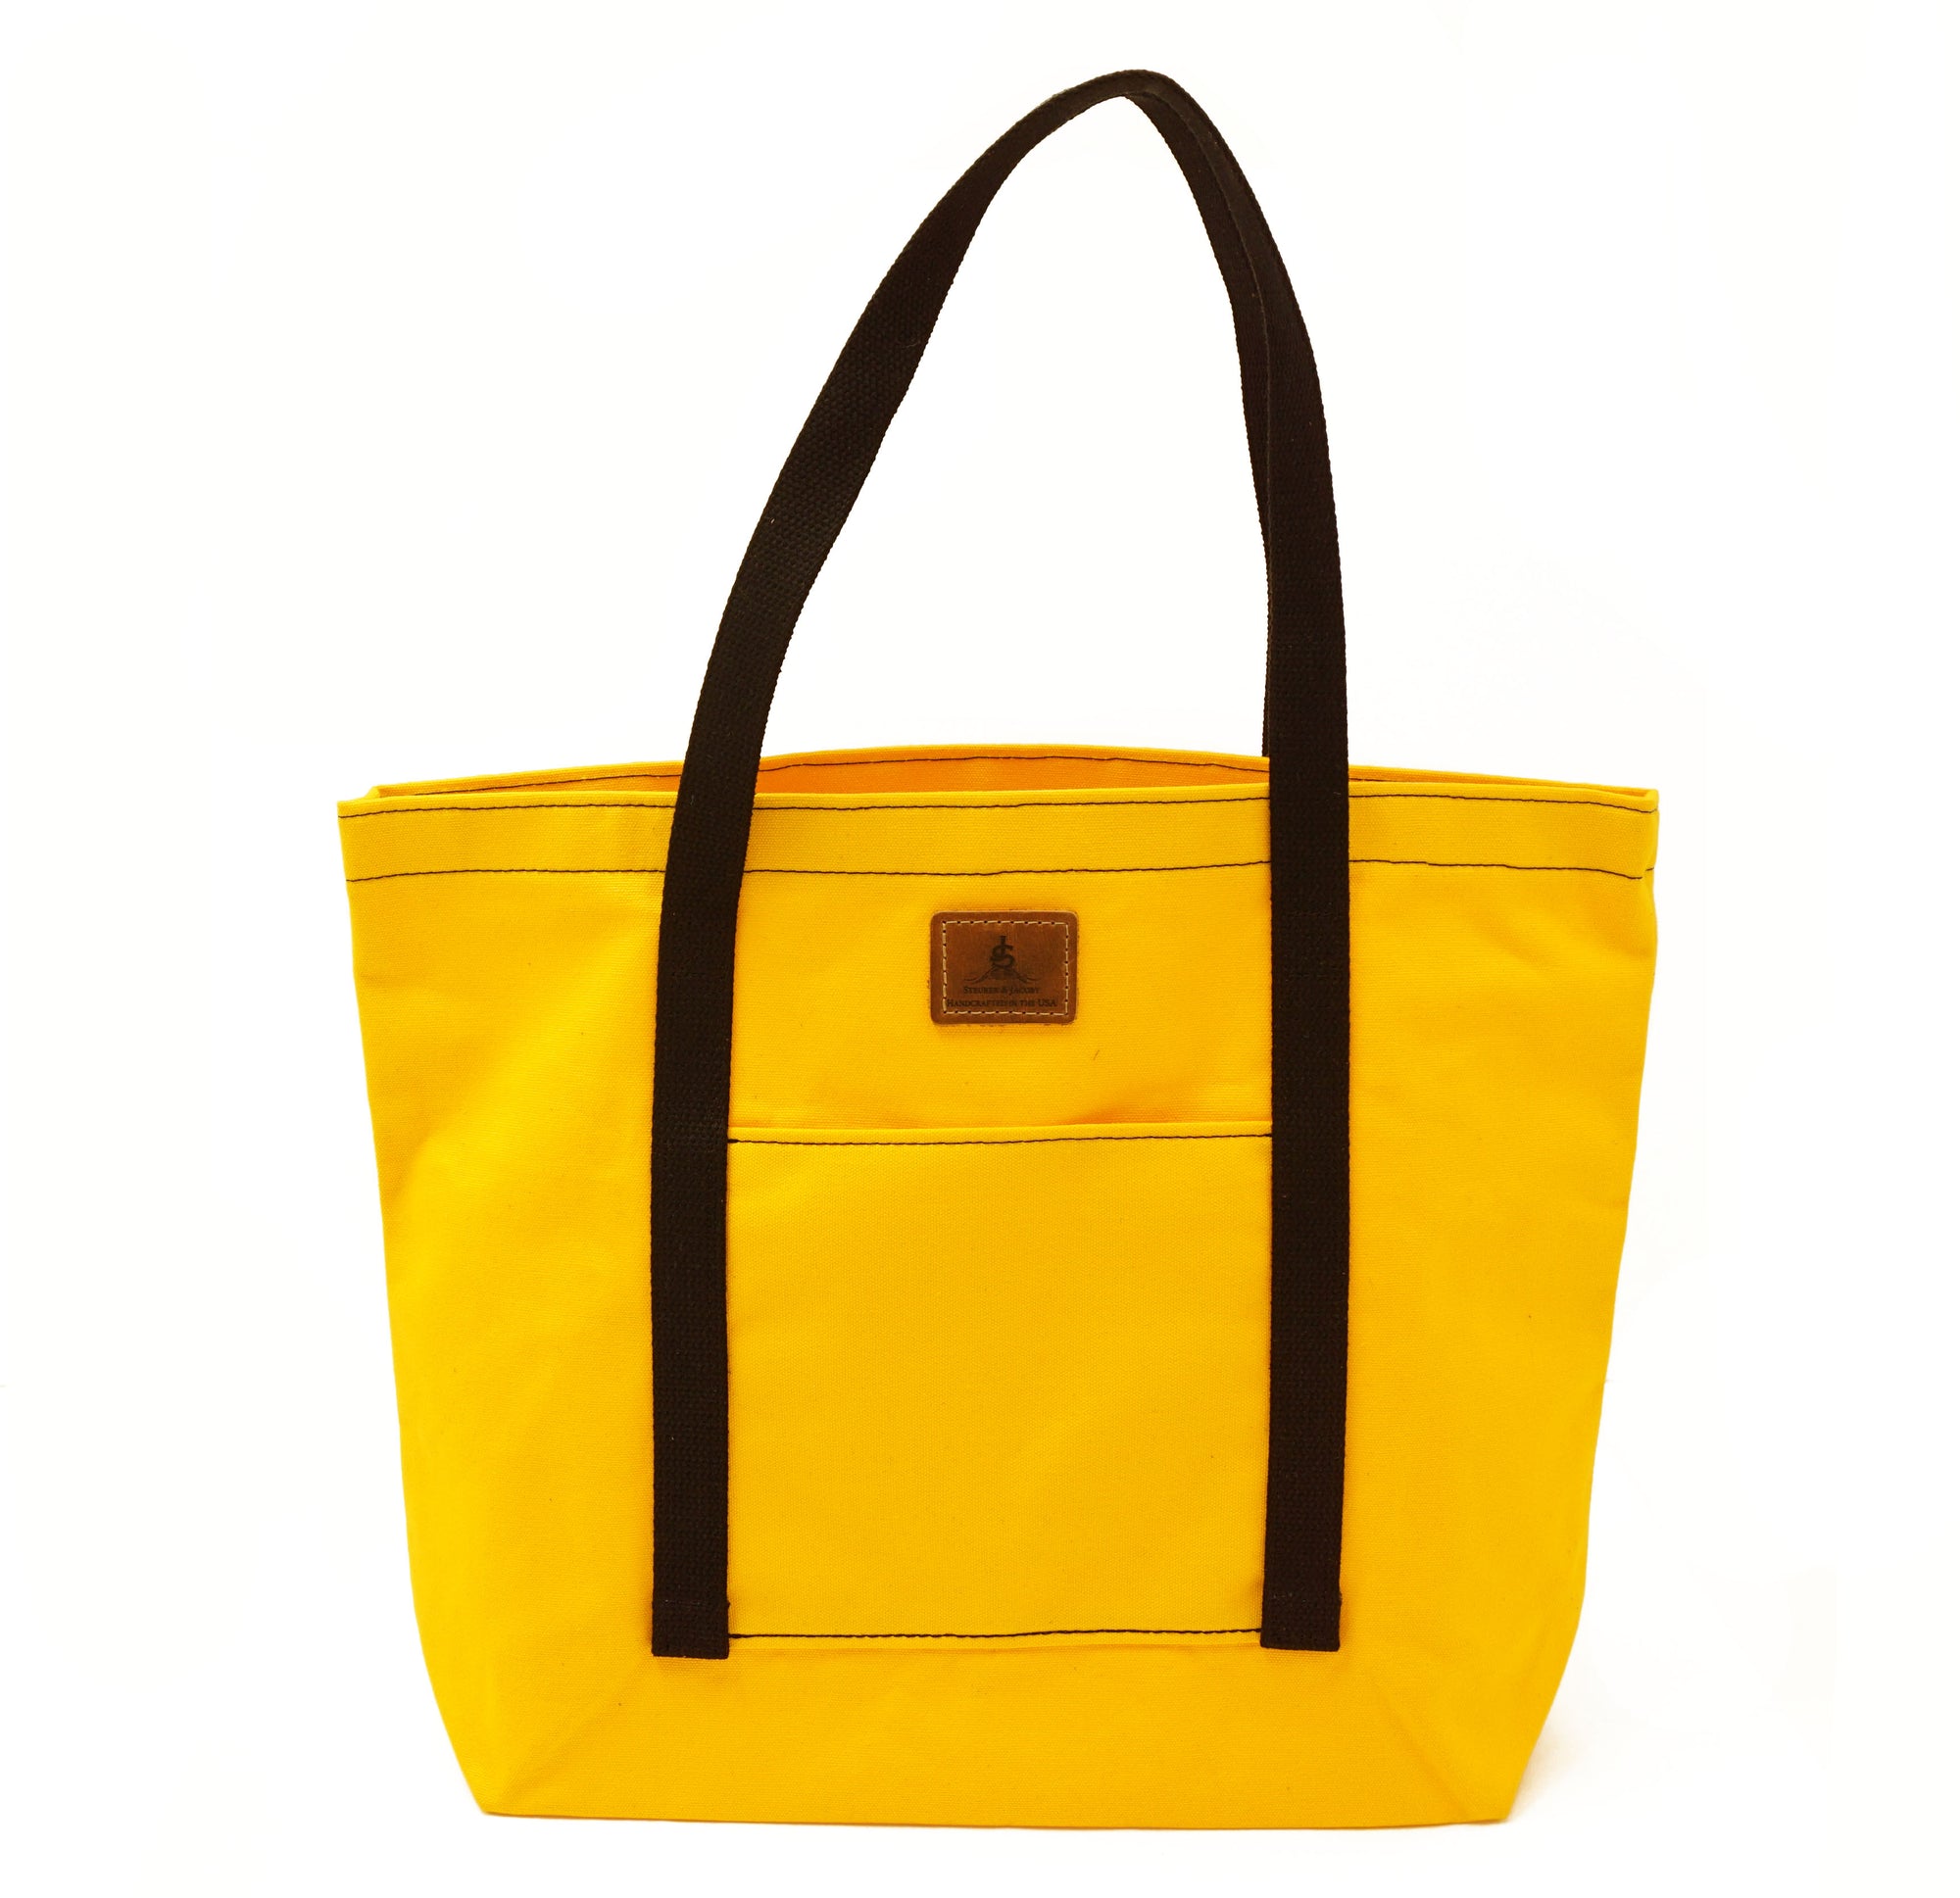 Basic Market Bag- Black and Yellow - Steurer & Jacoby